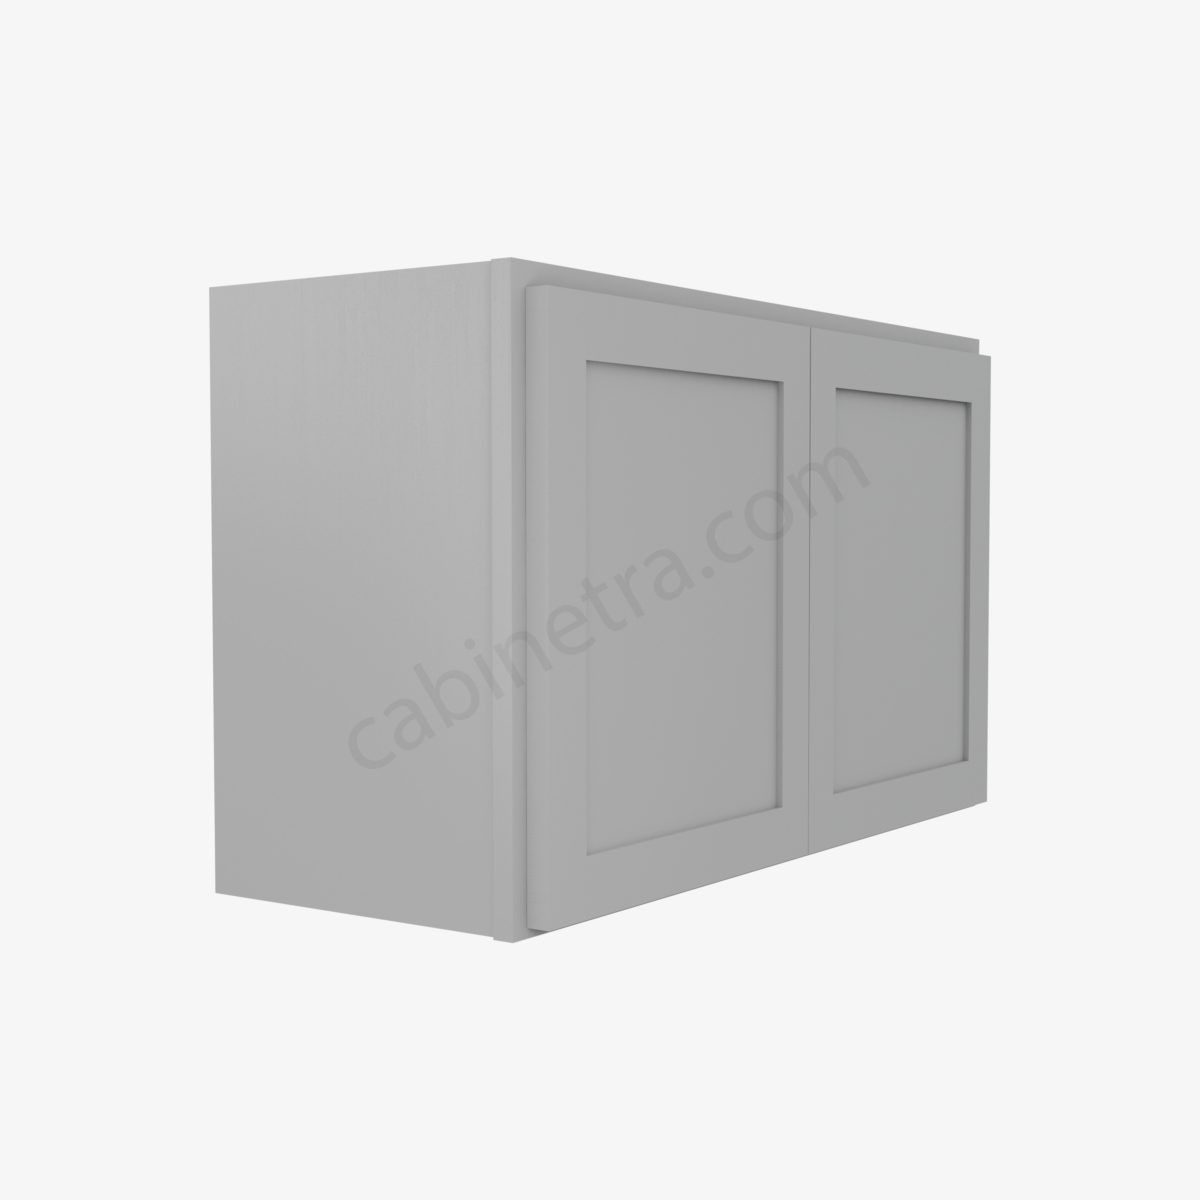 AB W3018B 4 Forevermark Lait Gray Shaker Cabinetra scaled